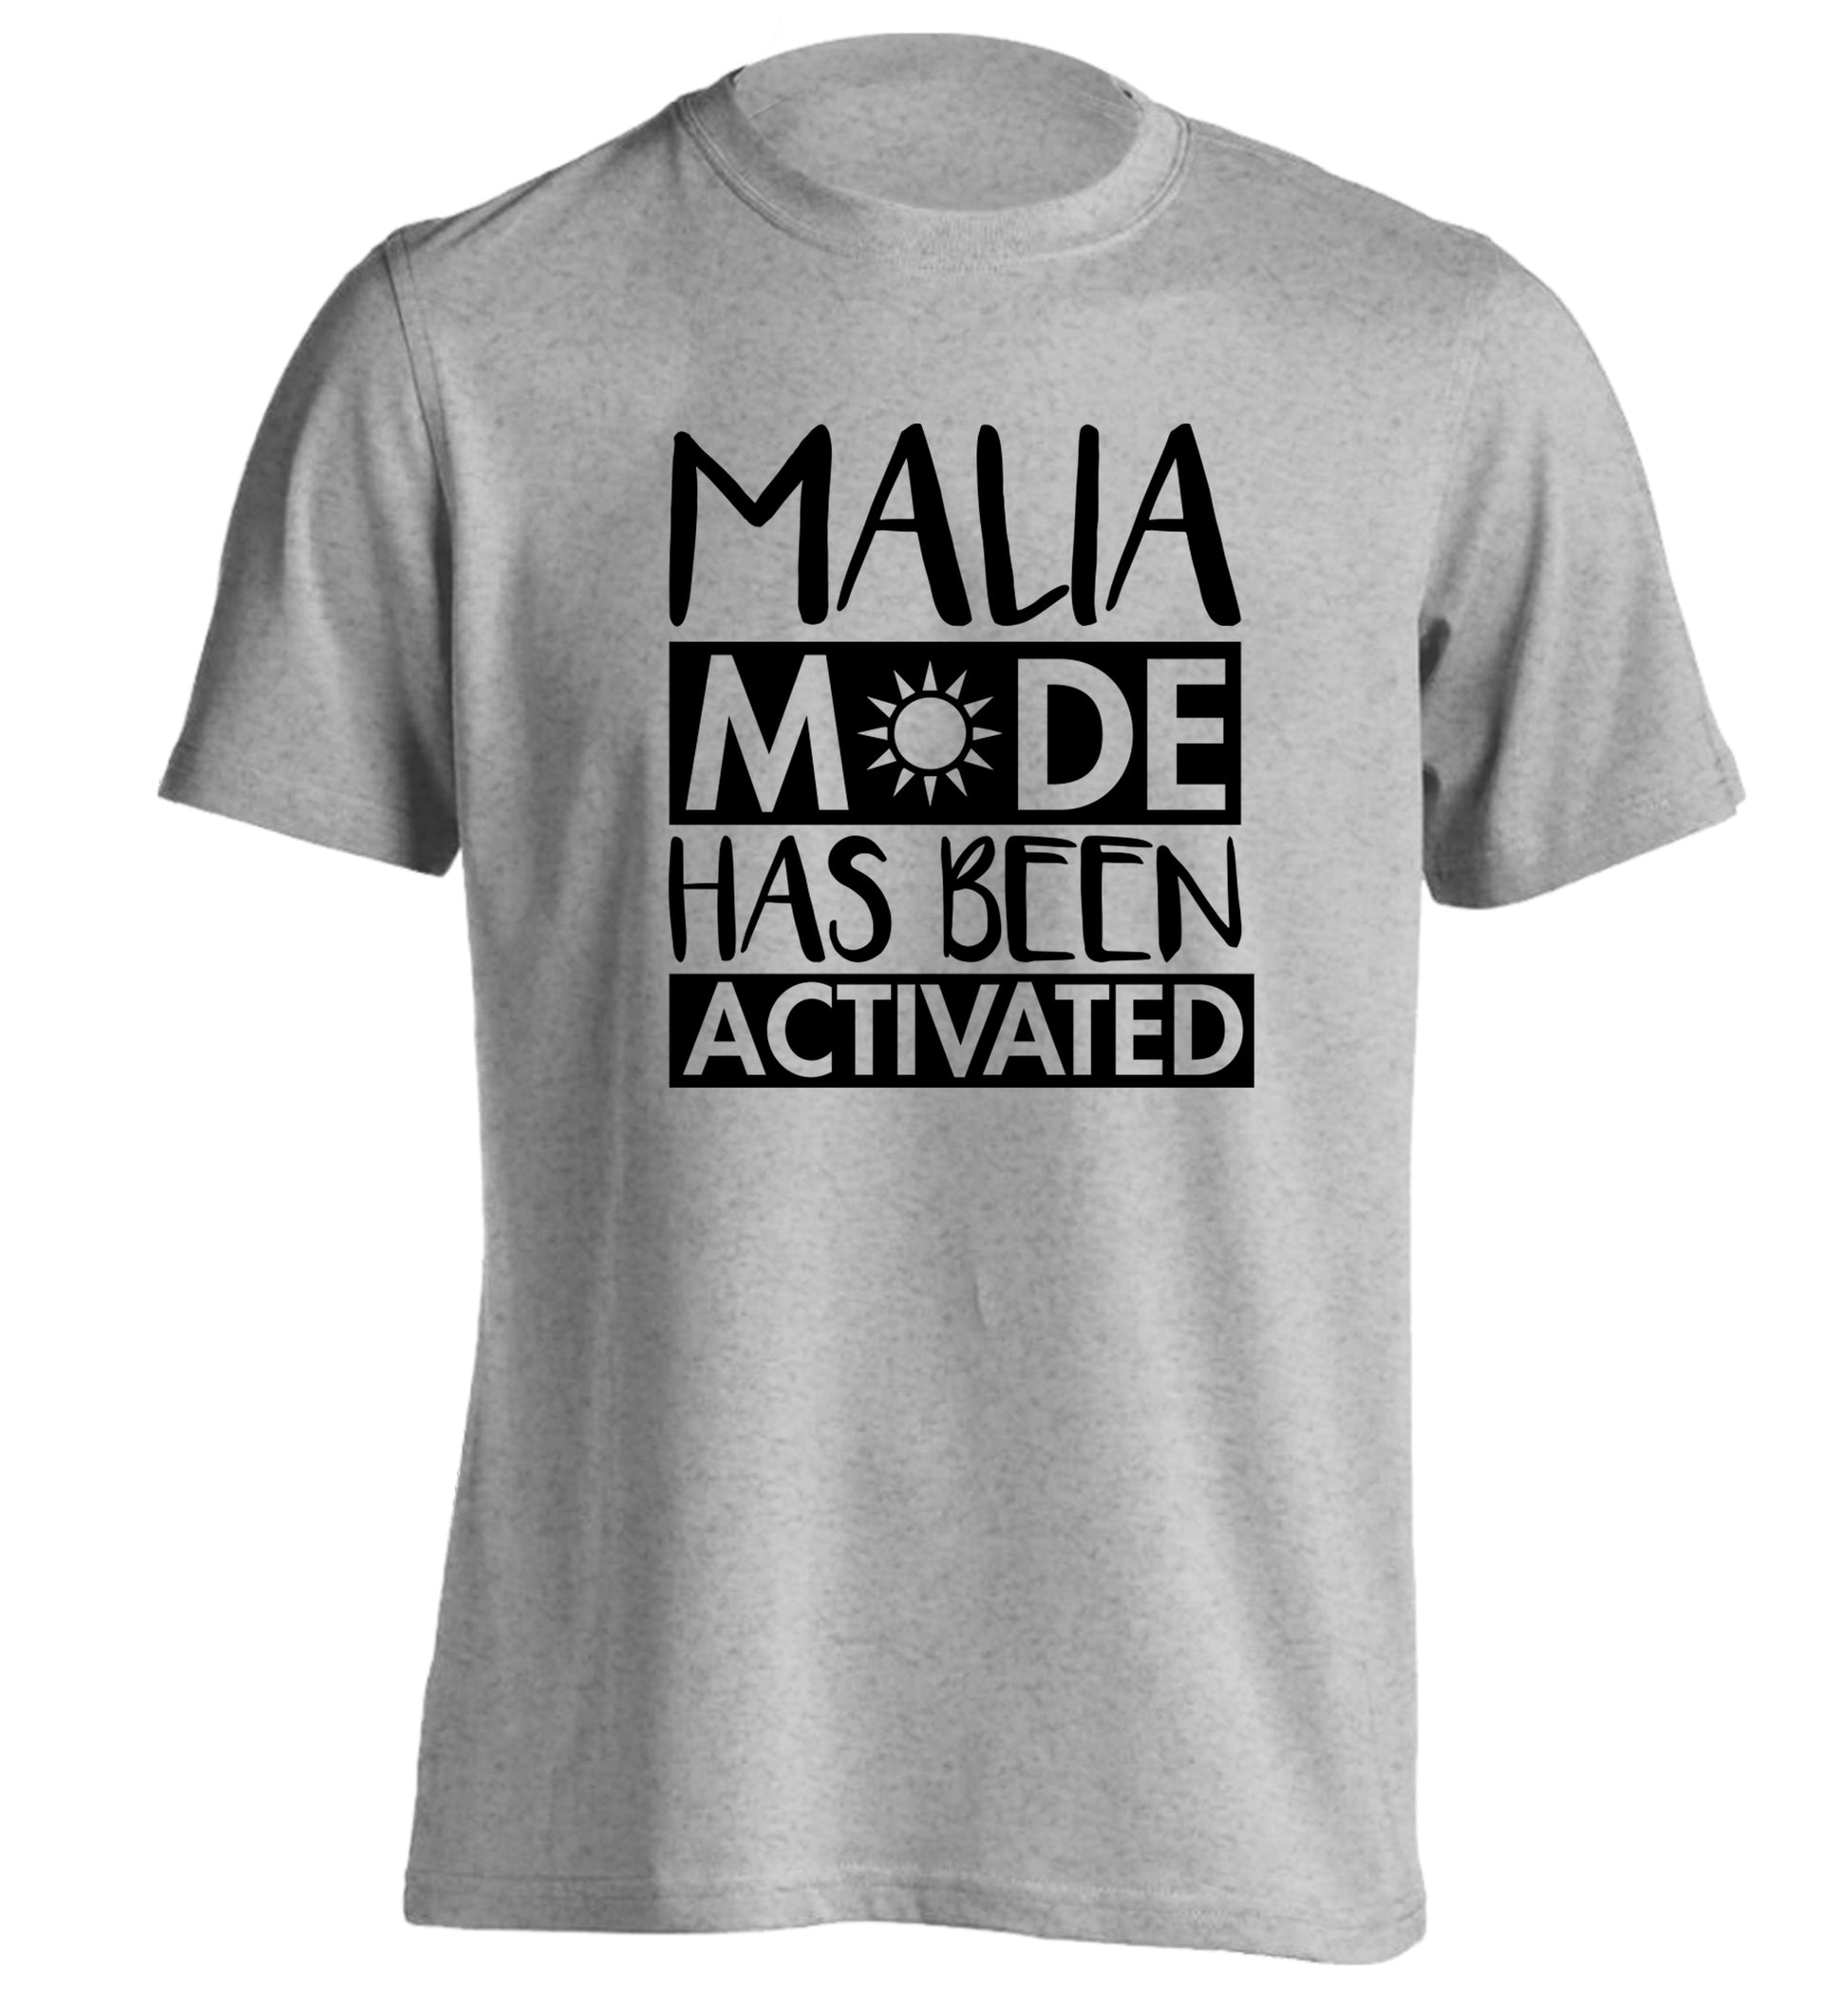 Malia mode has been activated adults unisex grey Tshirt 2XL